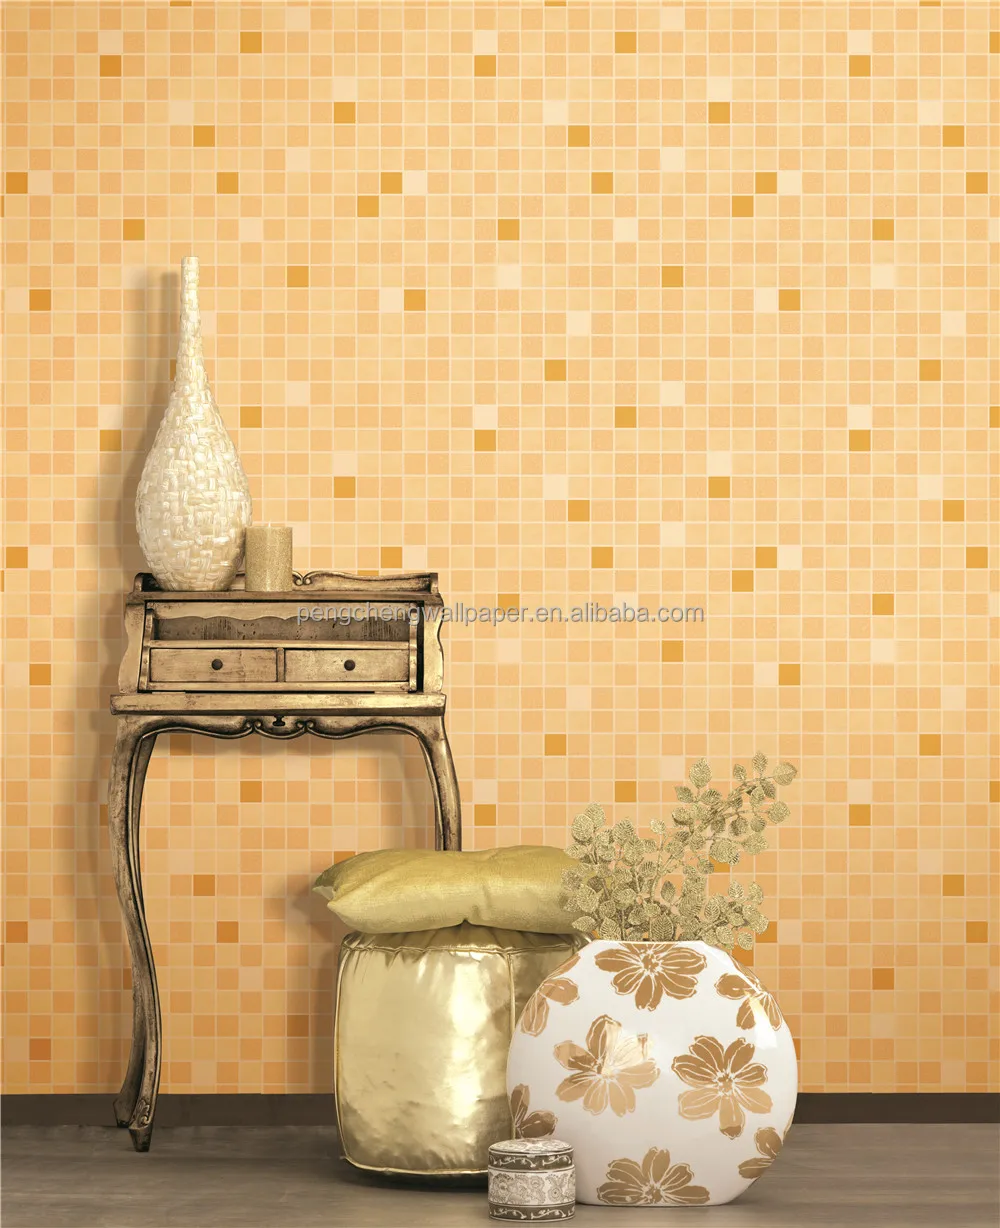 3d Wallpaper For Home Decoration Wallpaper 3d Wall Price 3d